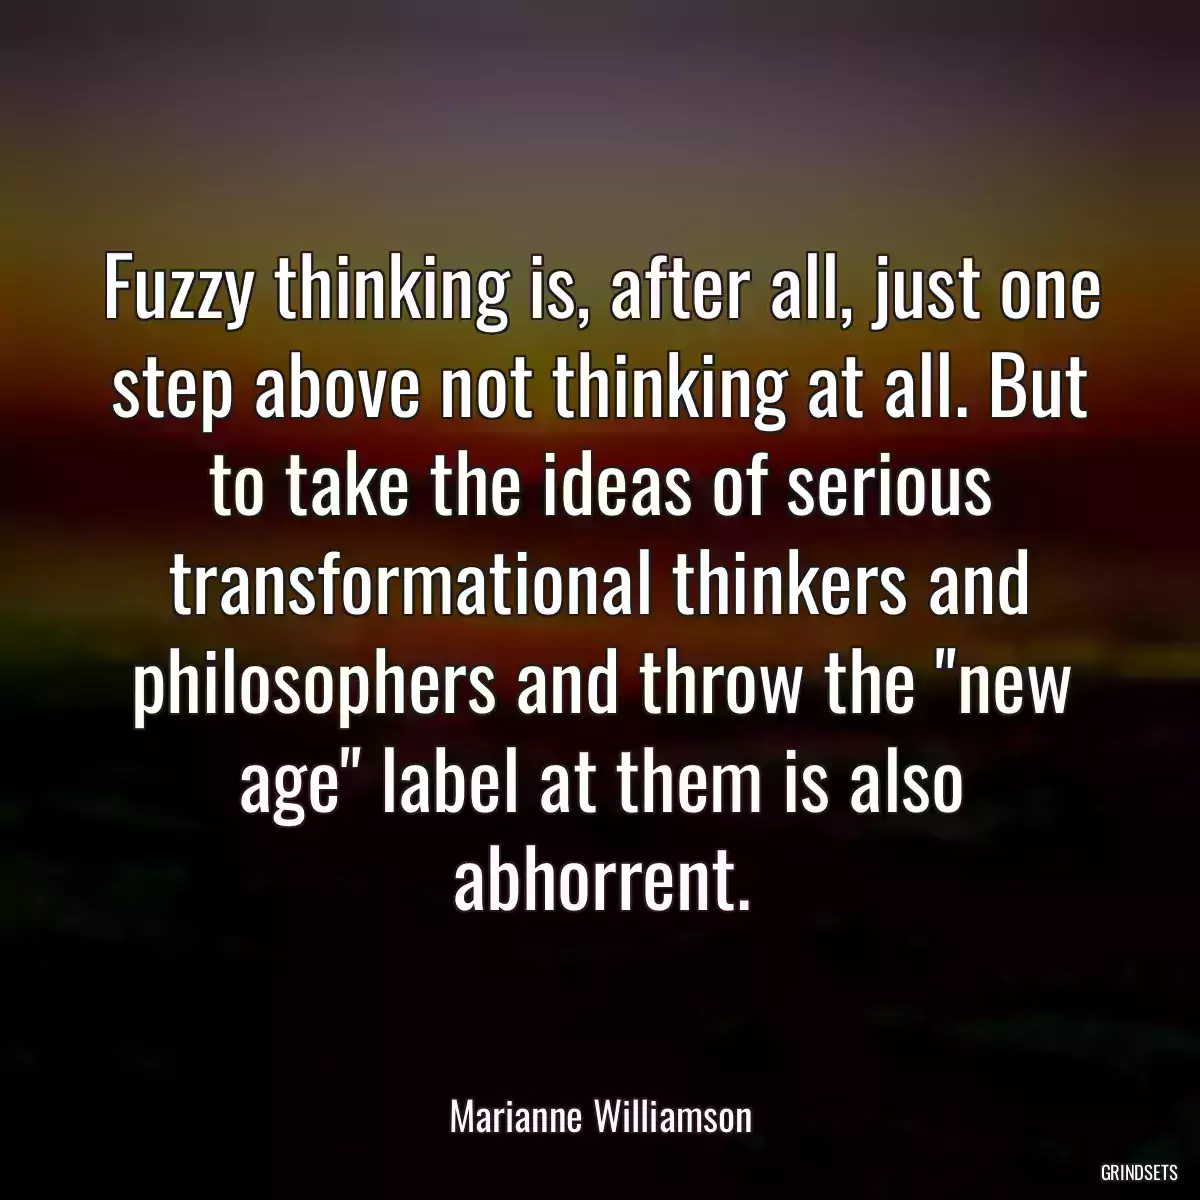 Fuzzy thinking is, after all, just one step above not thinking at all. But to take the ideas of serious transformational thinkers and philosophers and throw the \